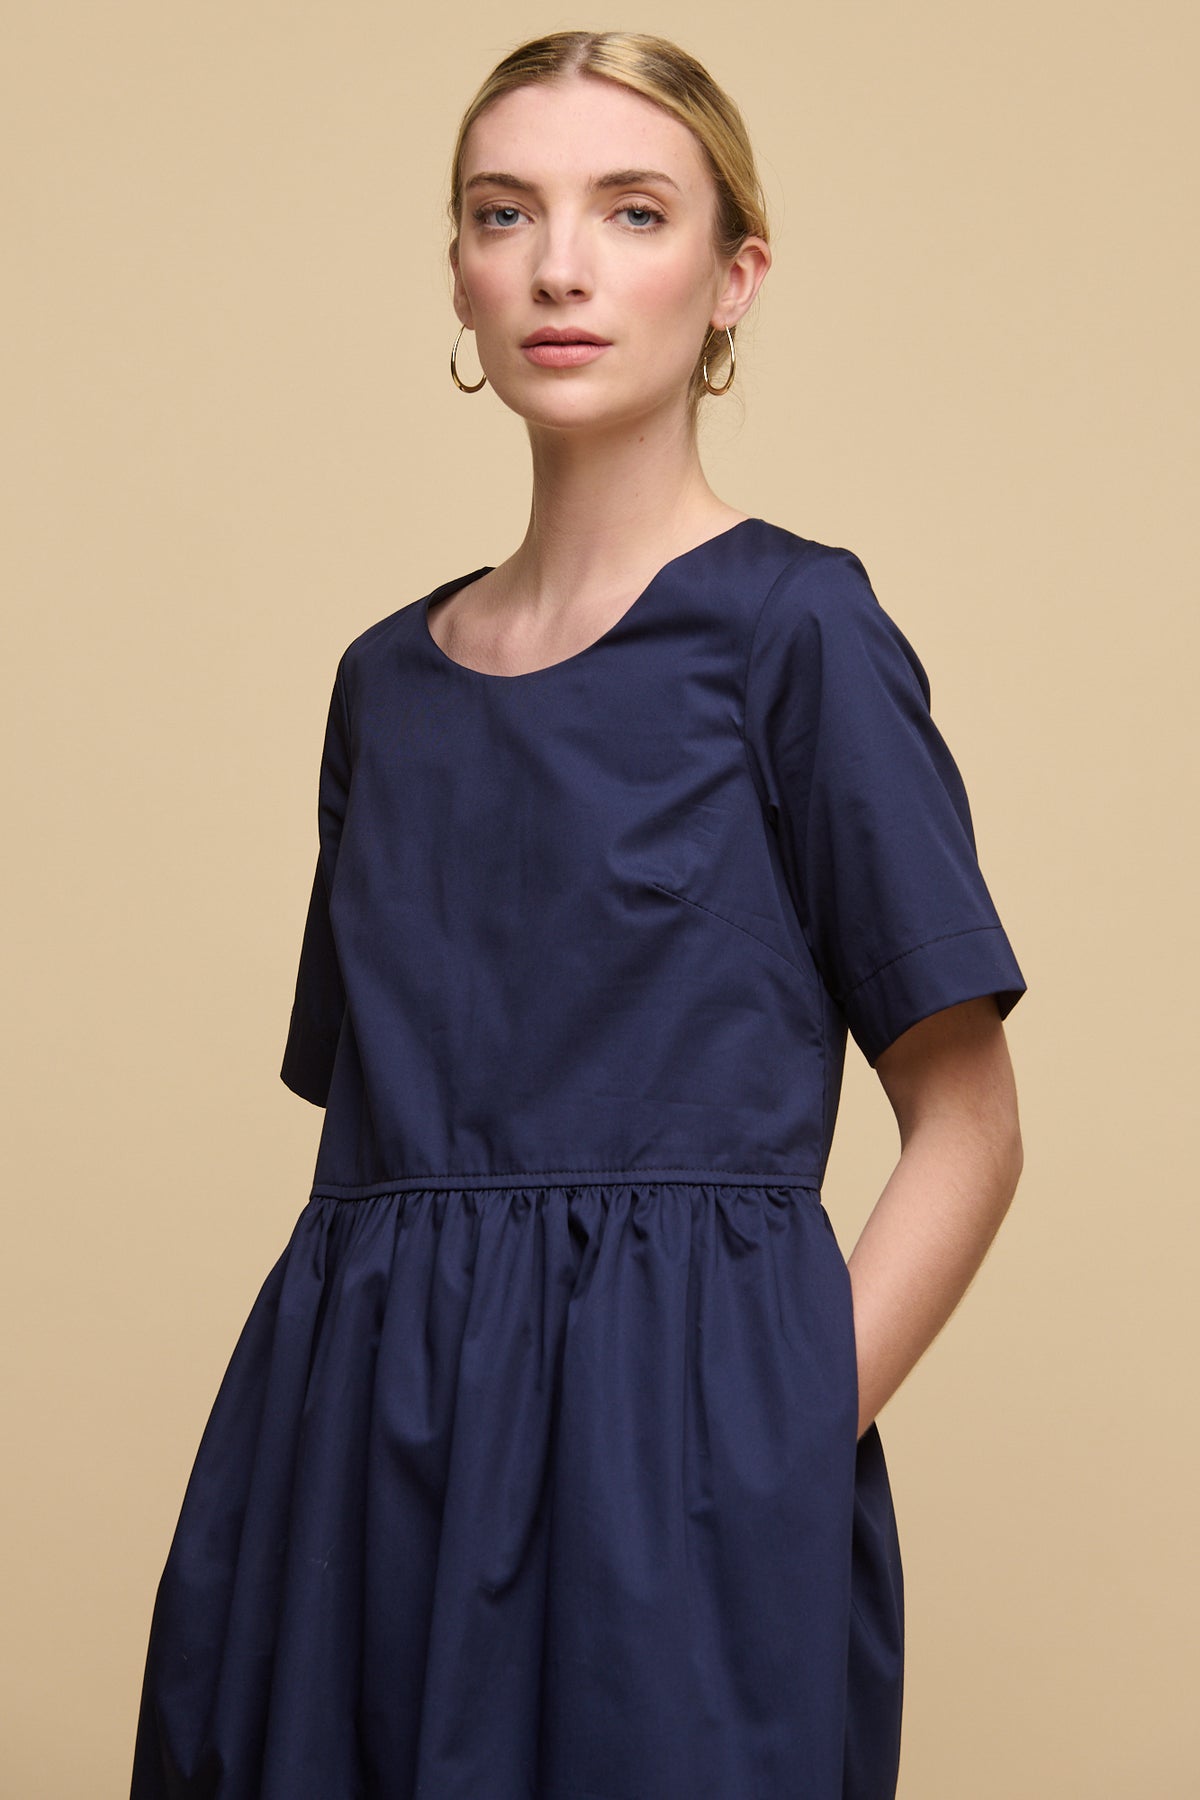 
            Thigh up image of blonde female with fair skin wearing crew neck gathered dress in navy with hands in pockets